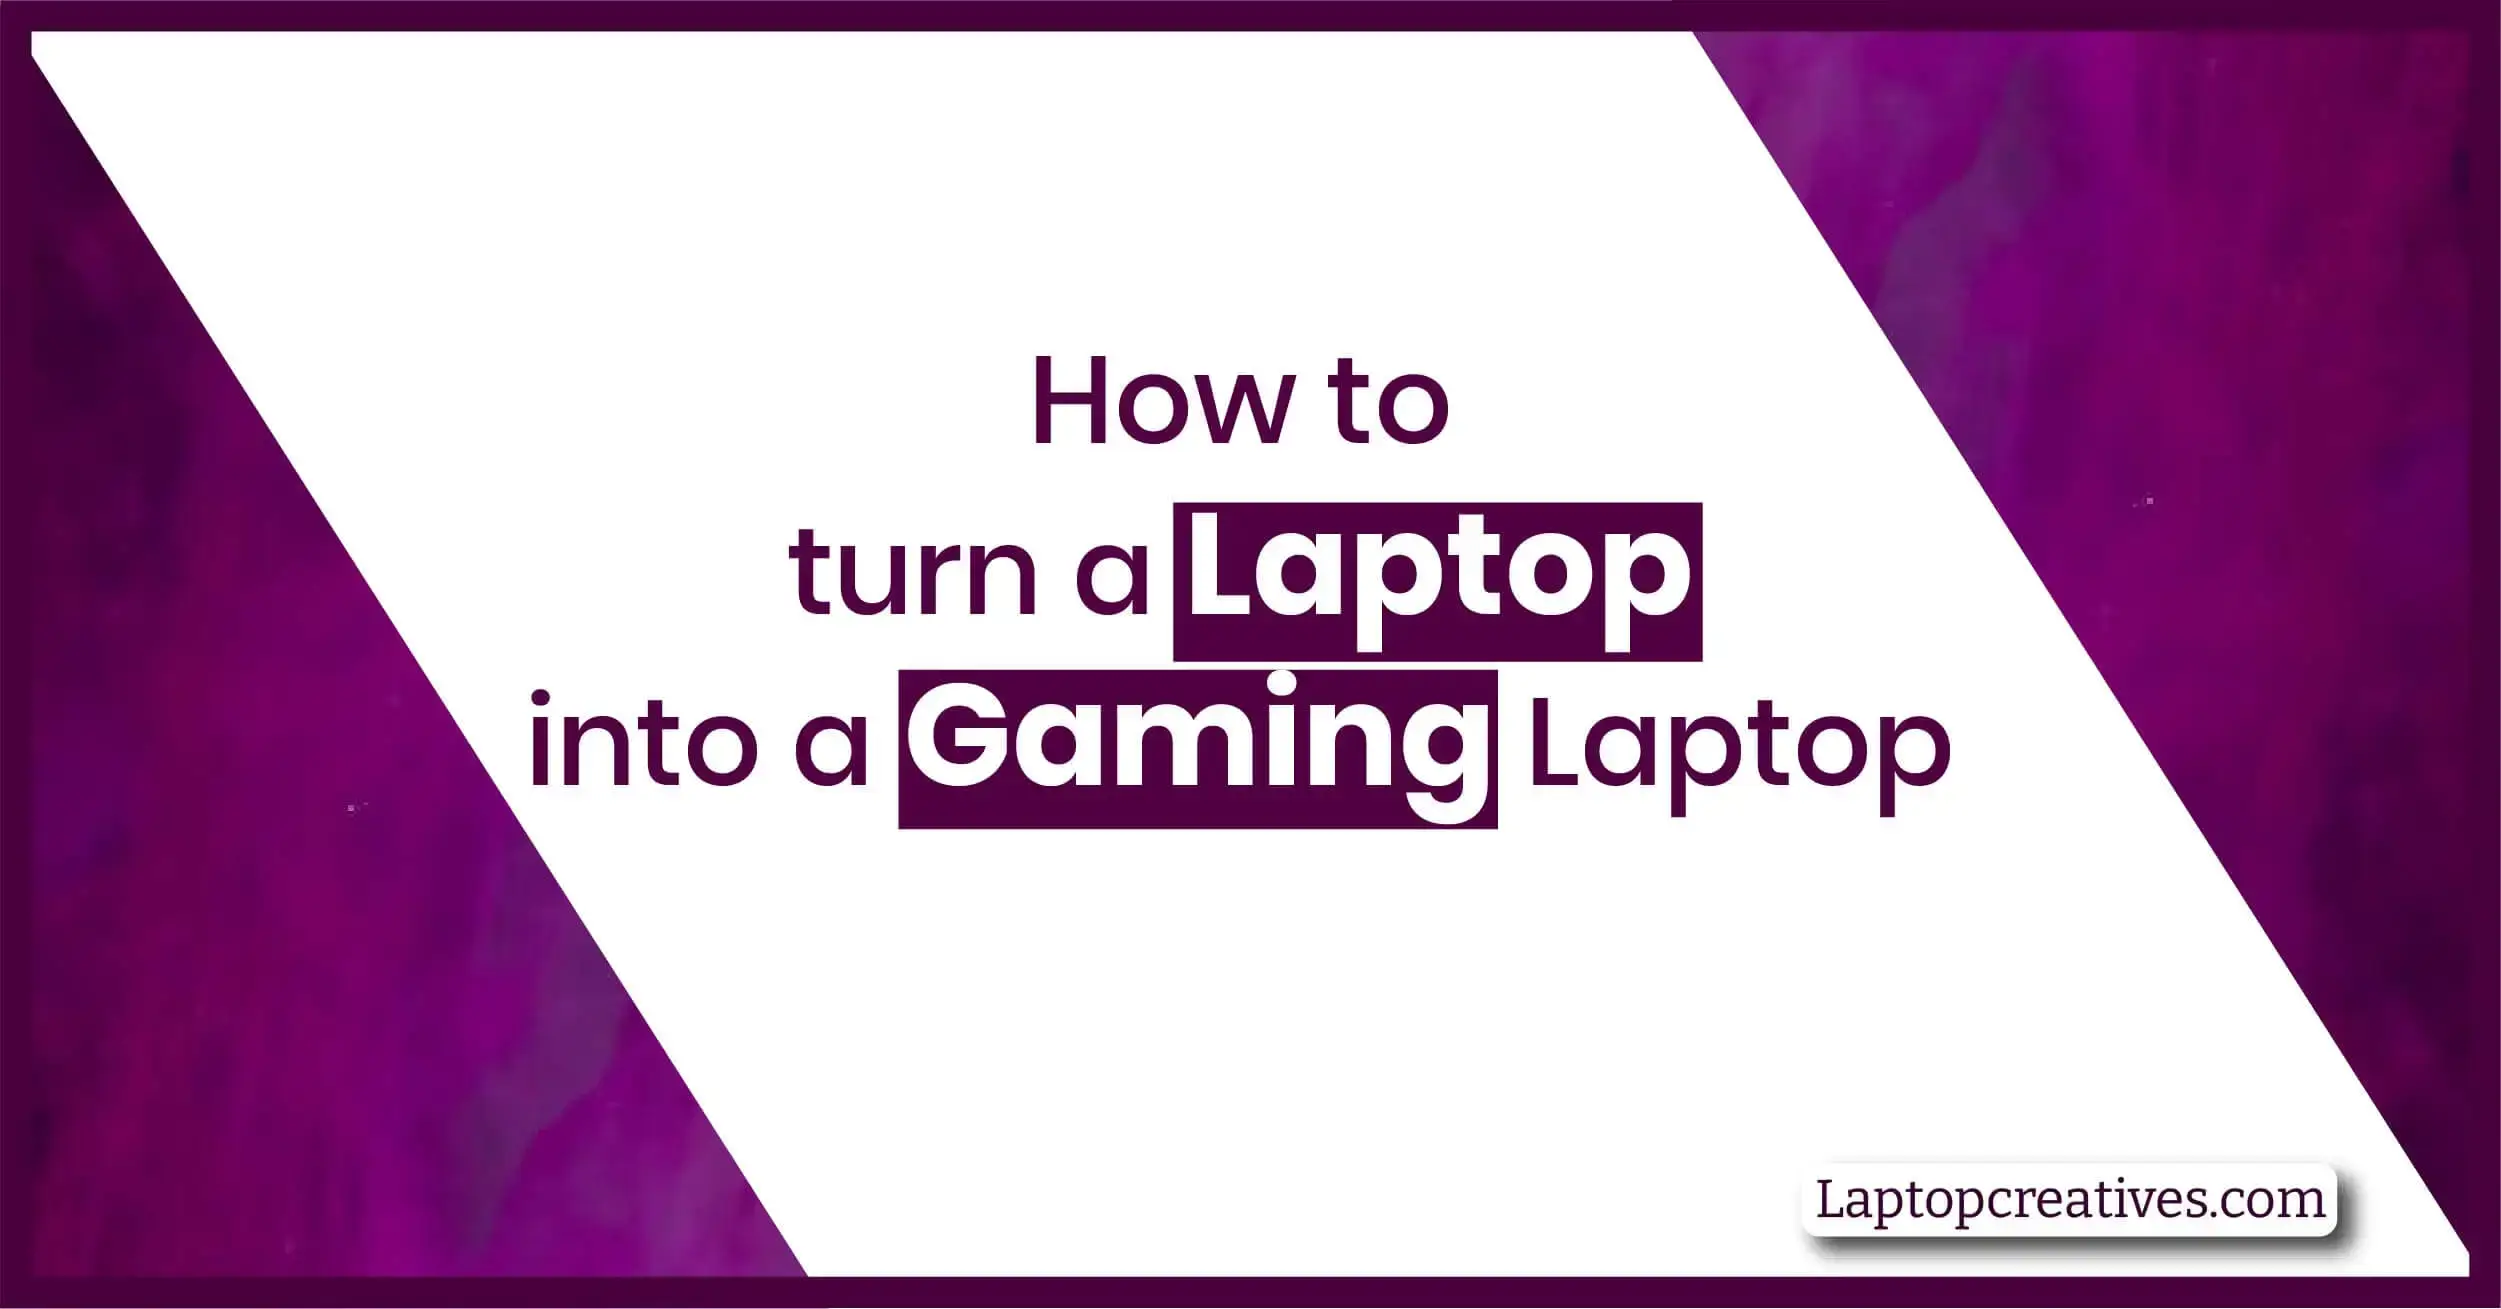 How to turn a Laptop into a Gaming Laptop